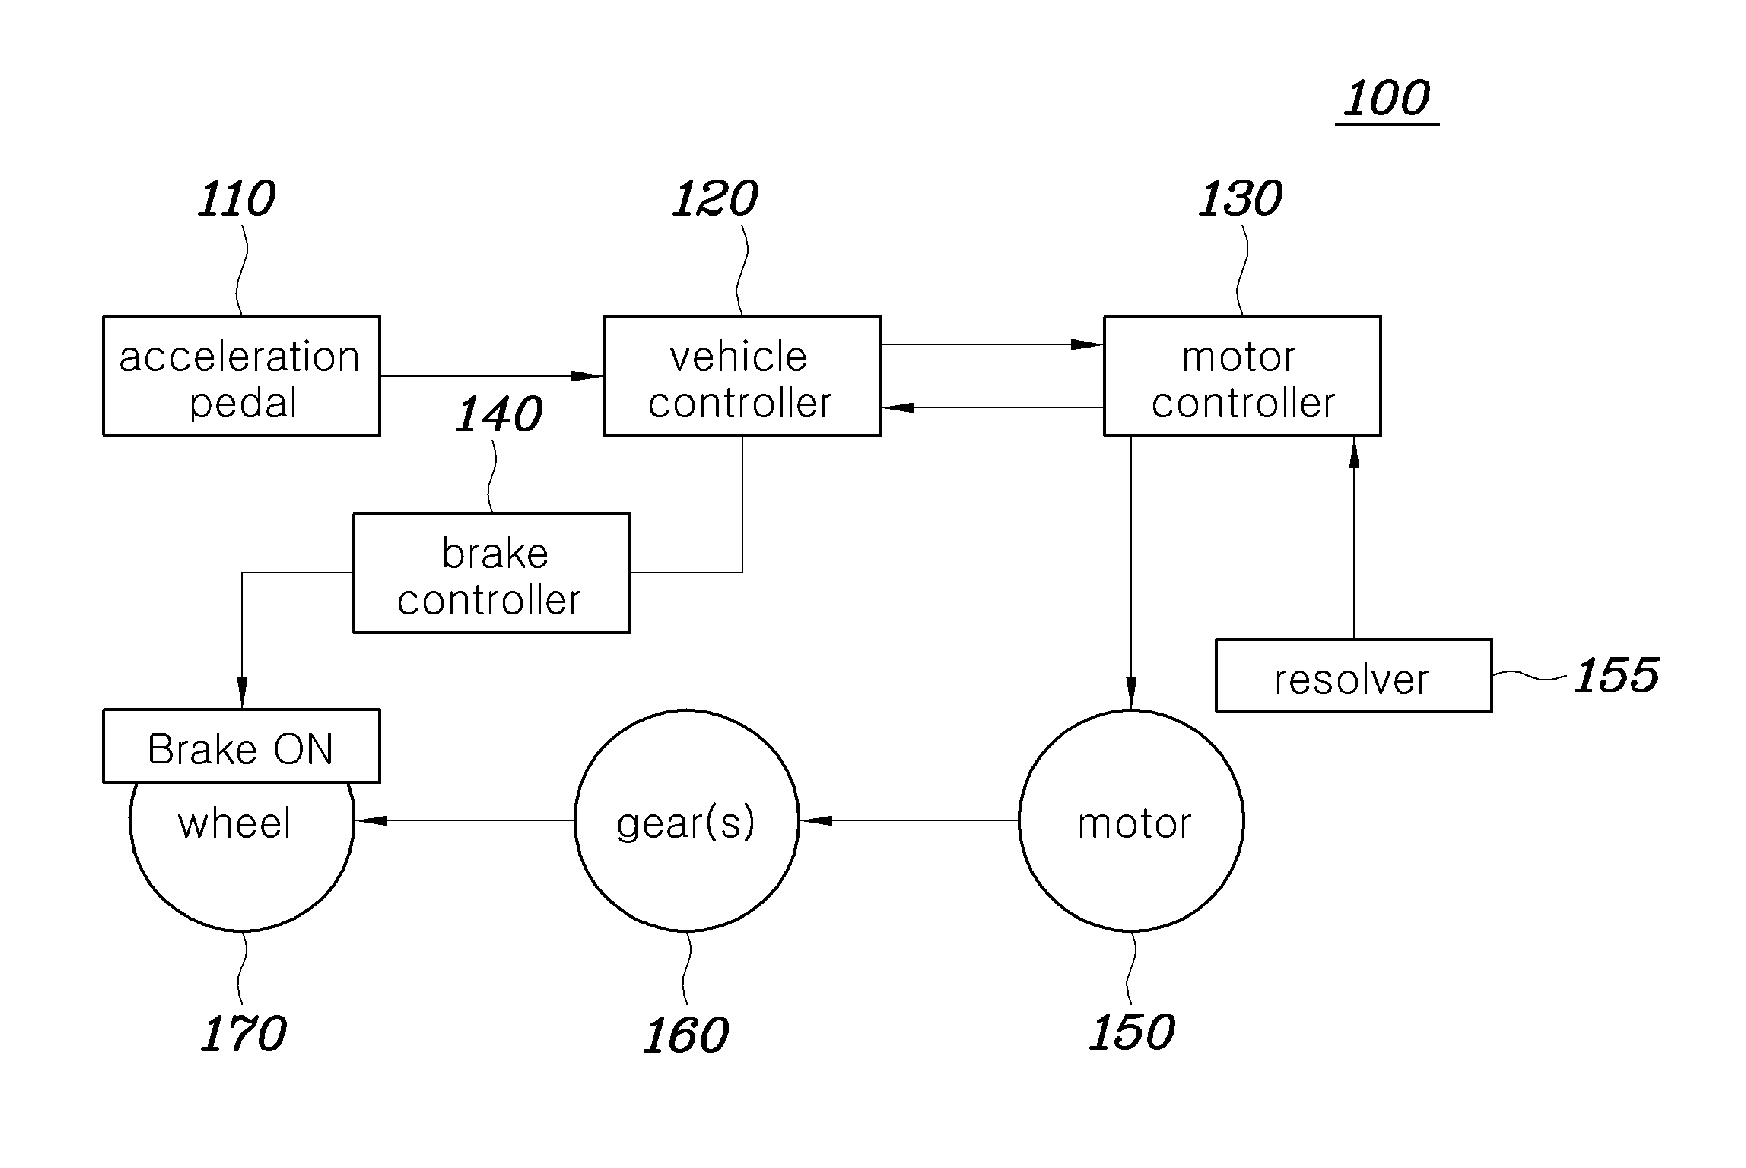 Controlling method and system for reducing tip-in shock